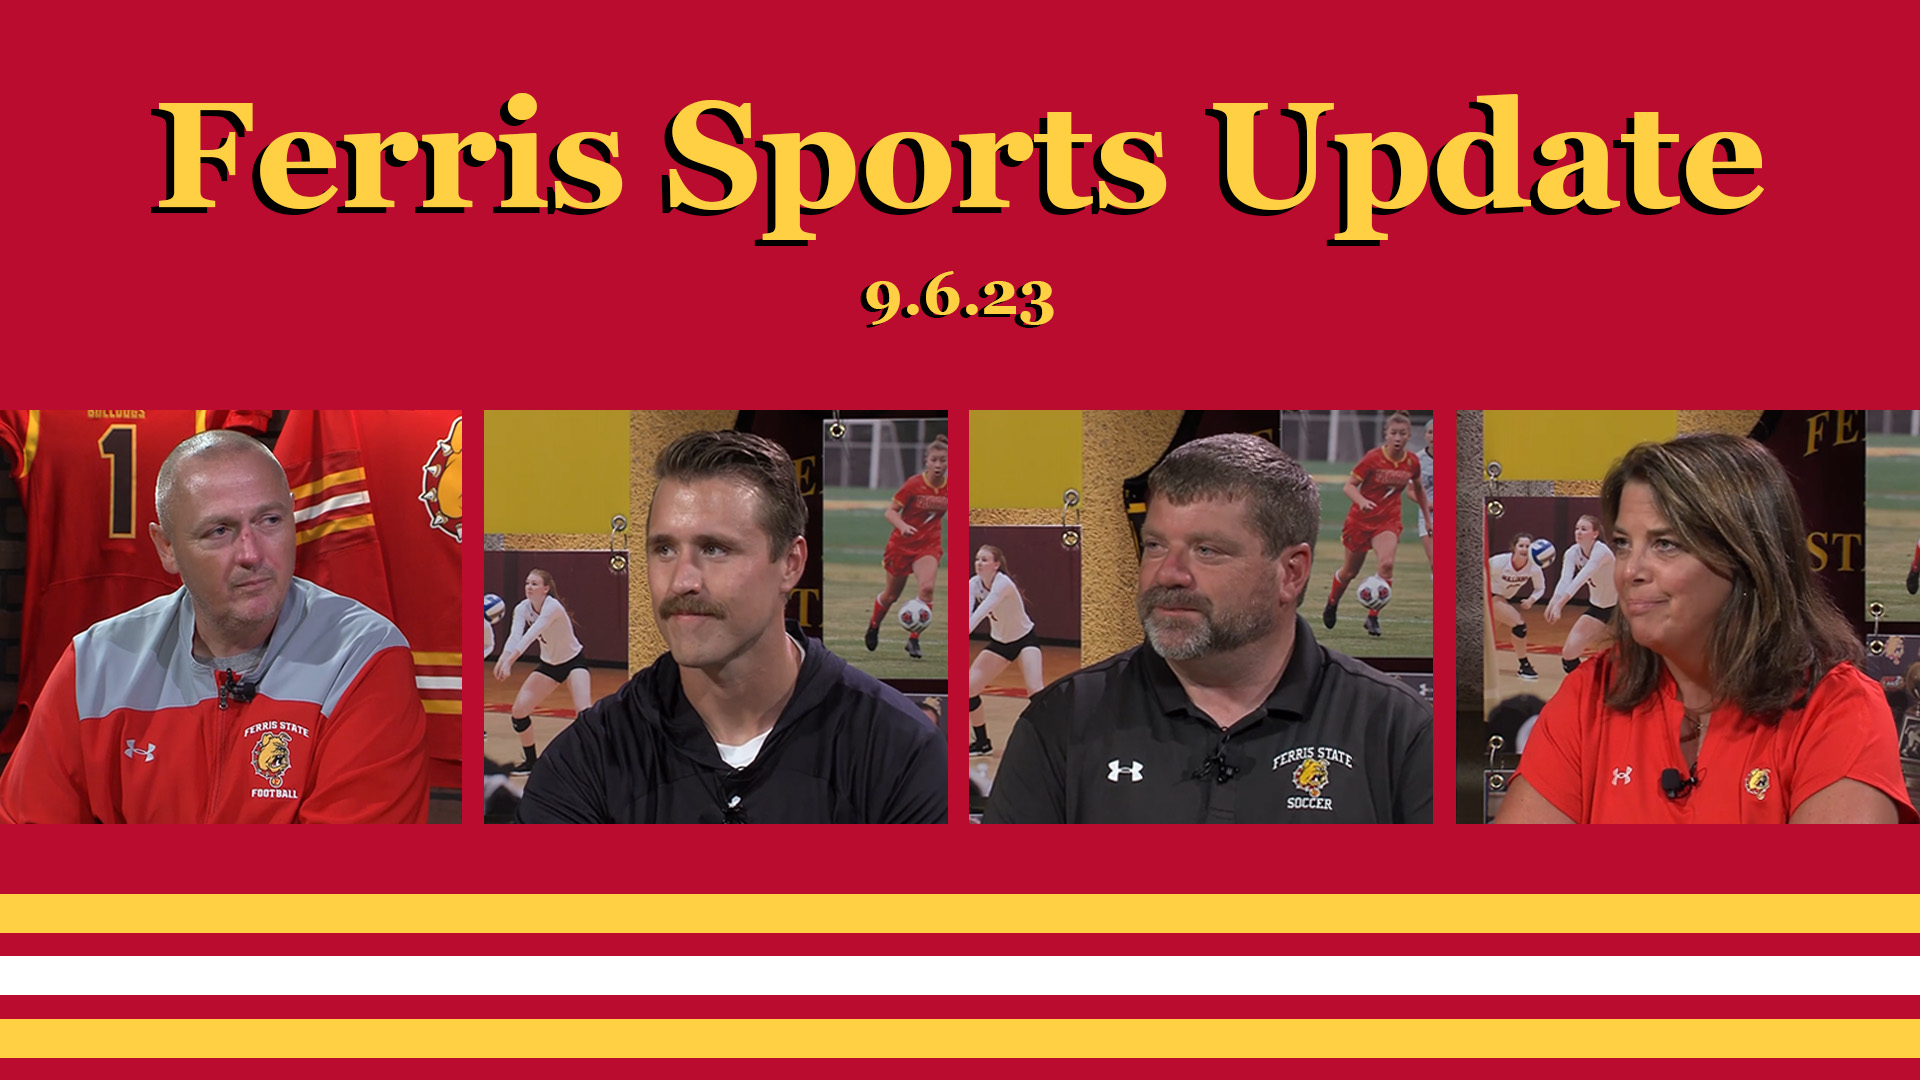 Ferris Sports Update 9.6.23 image with host and guests